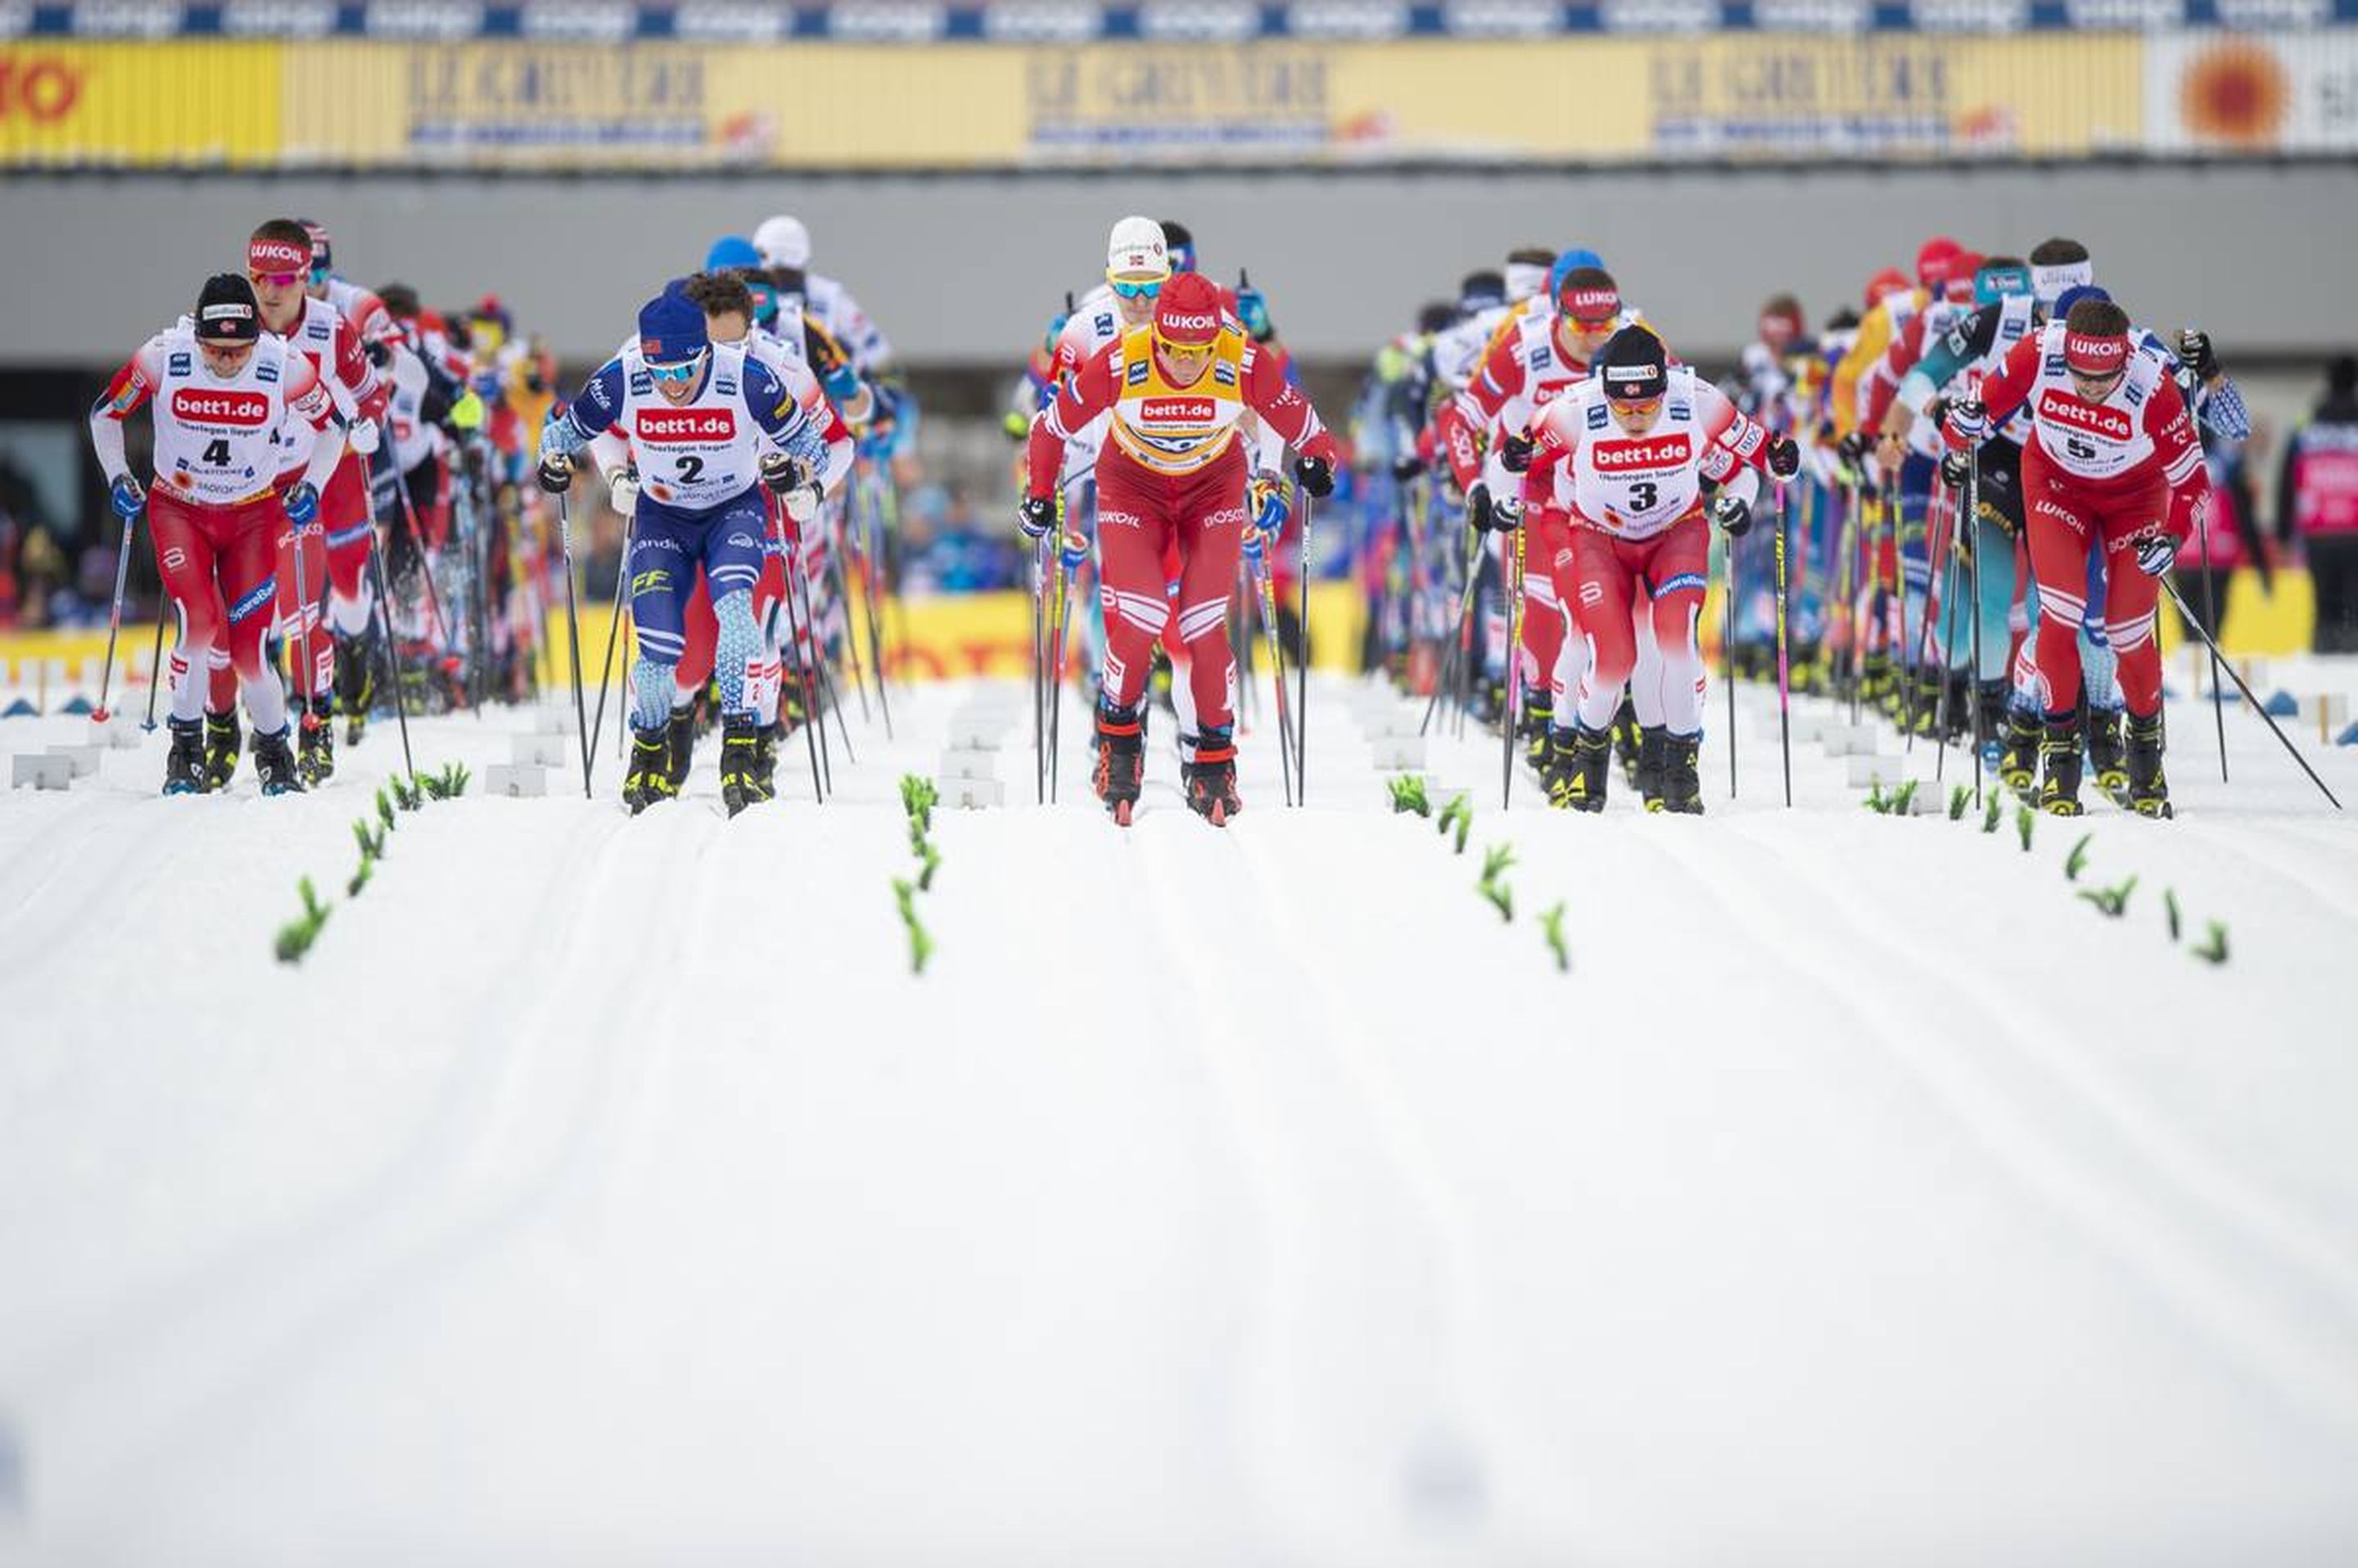 Tracks are set for the season, including the big highlight of the Nordic World Ski Championships in Oberstdorf